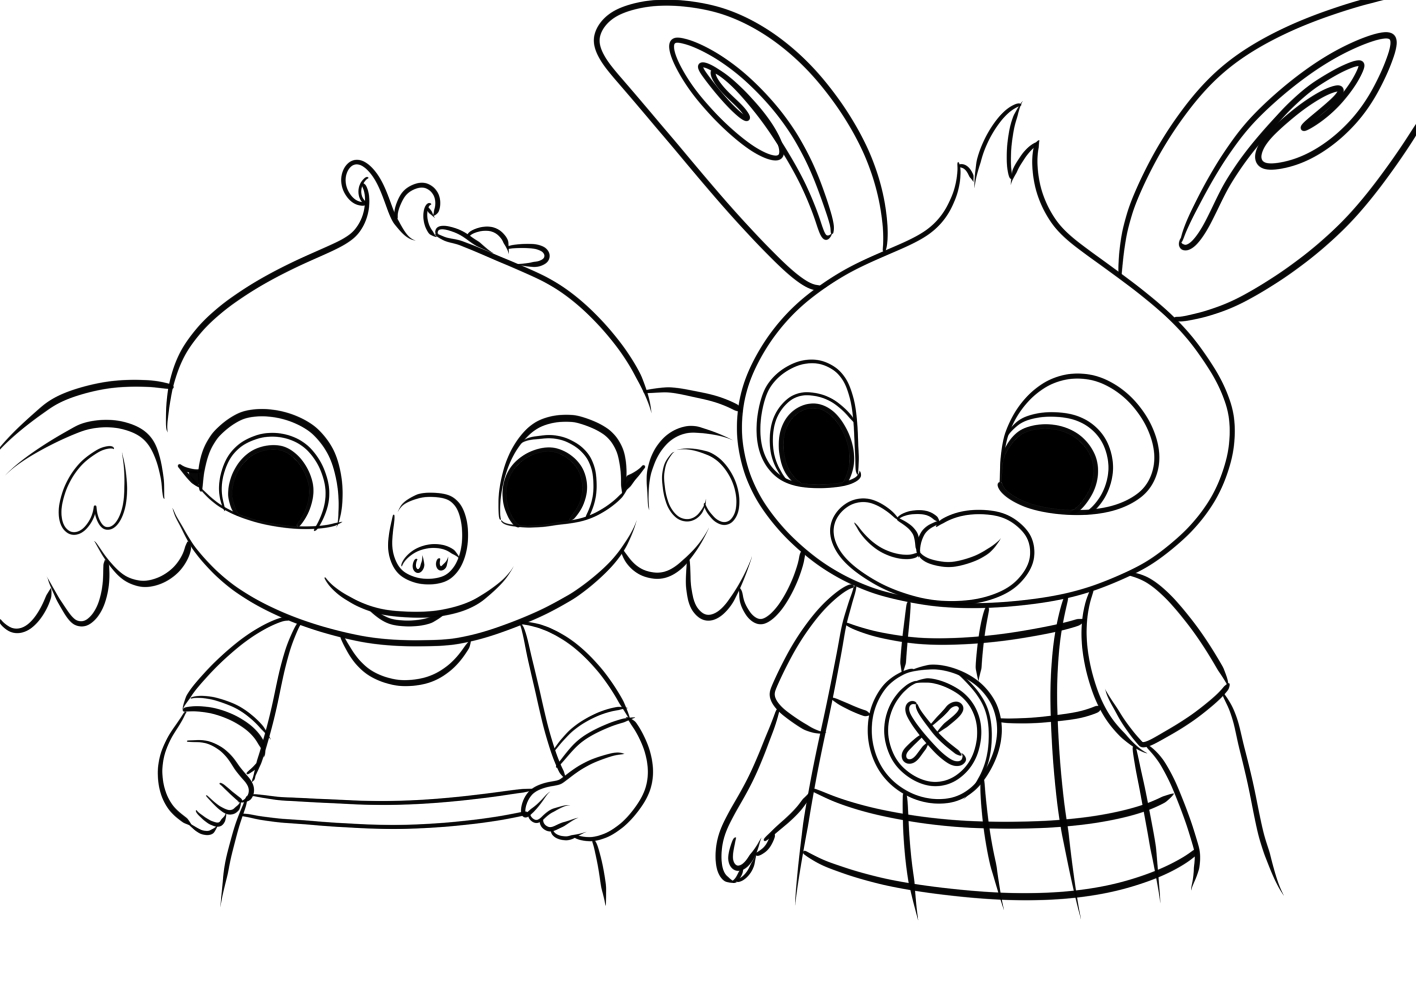 Bing, Bing booby coloring page to print and coloring